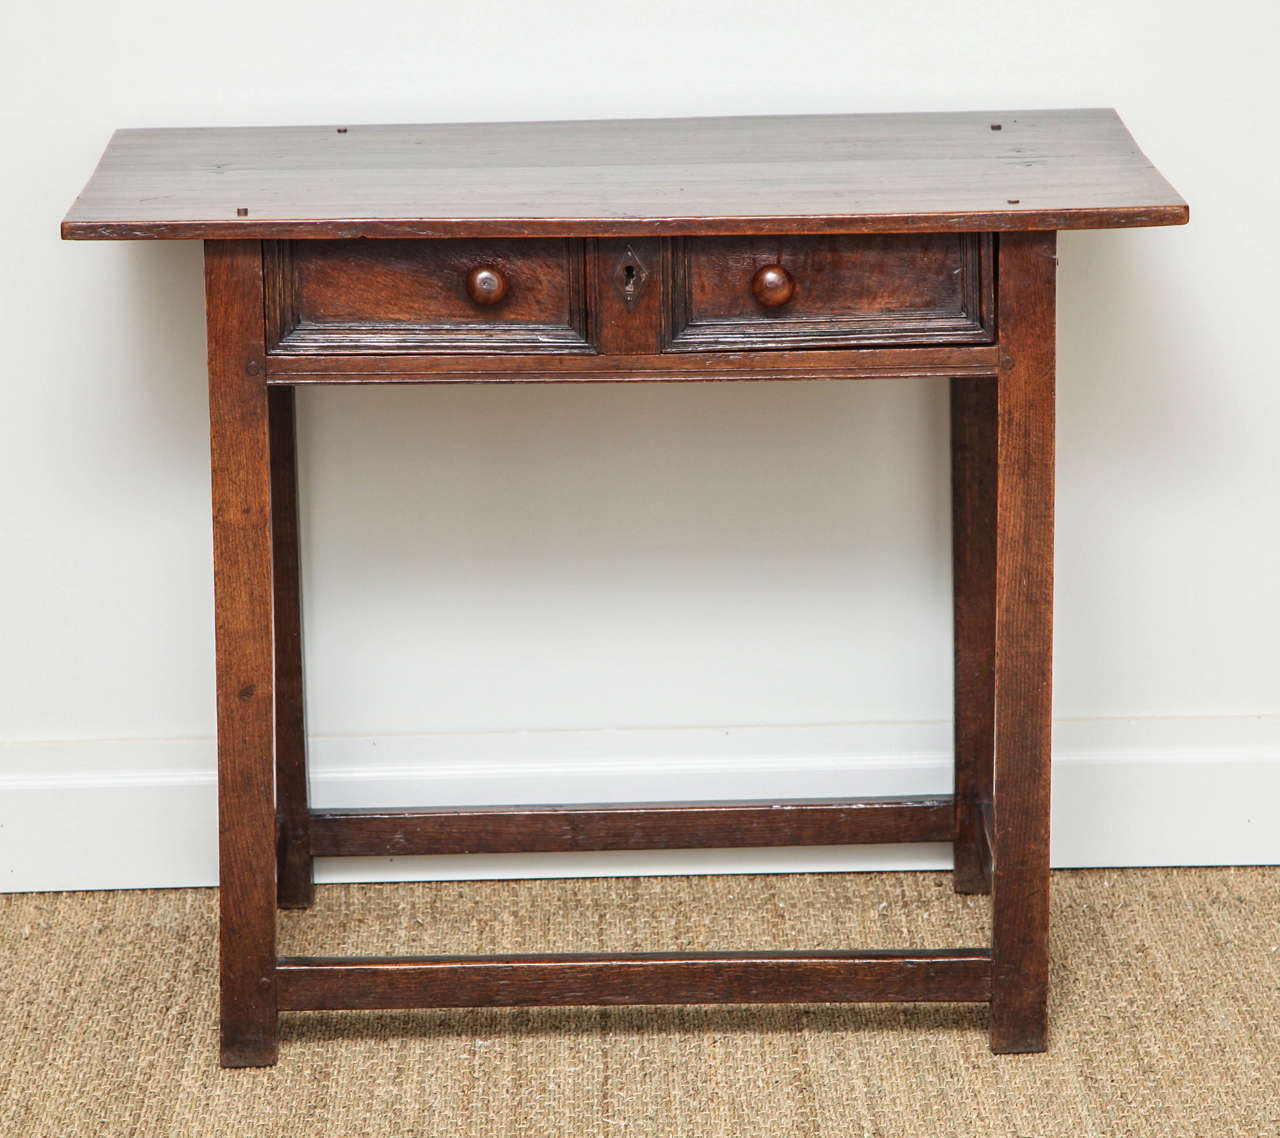 Late 17th or early 18th century English or Welsh oak side table, the two-plank top over single drawer with geometric moldings and original turned yewwood knobs, over simple legs joined by box stretcher, the drawer having original dividers. The